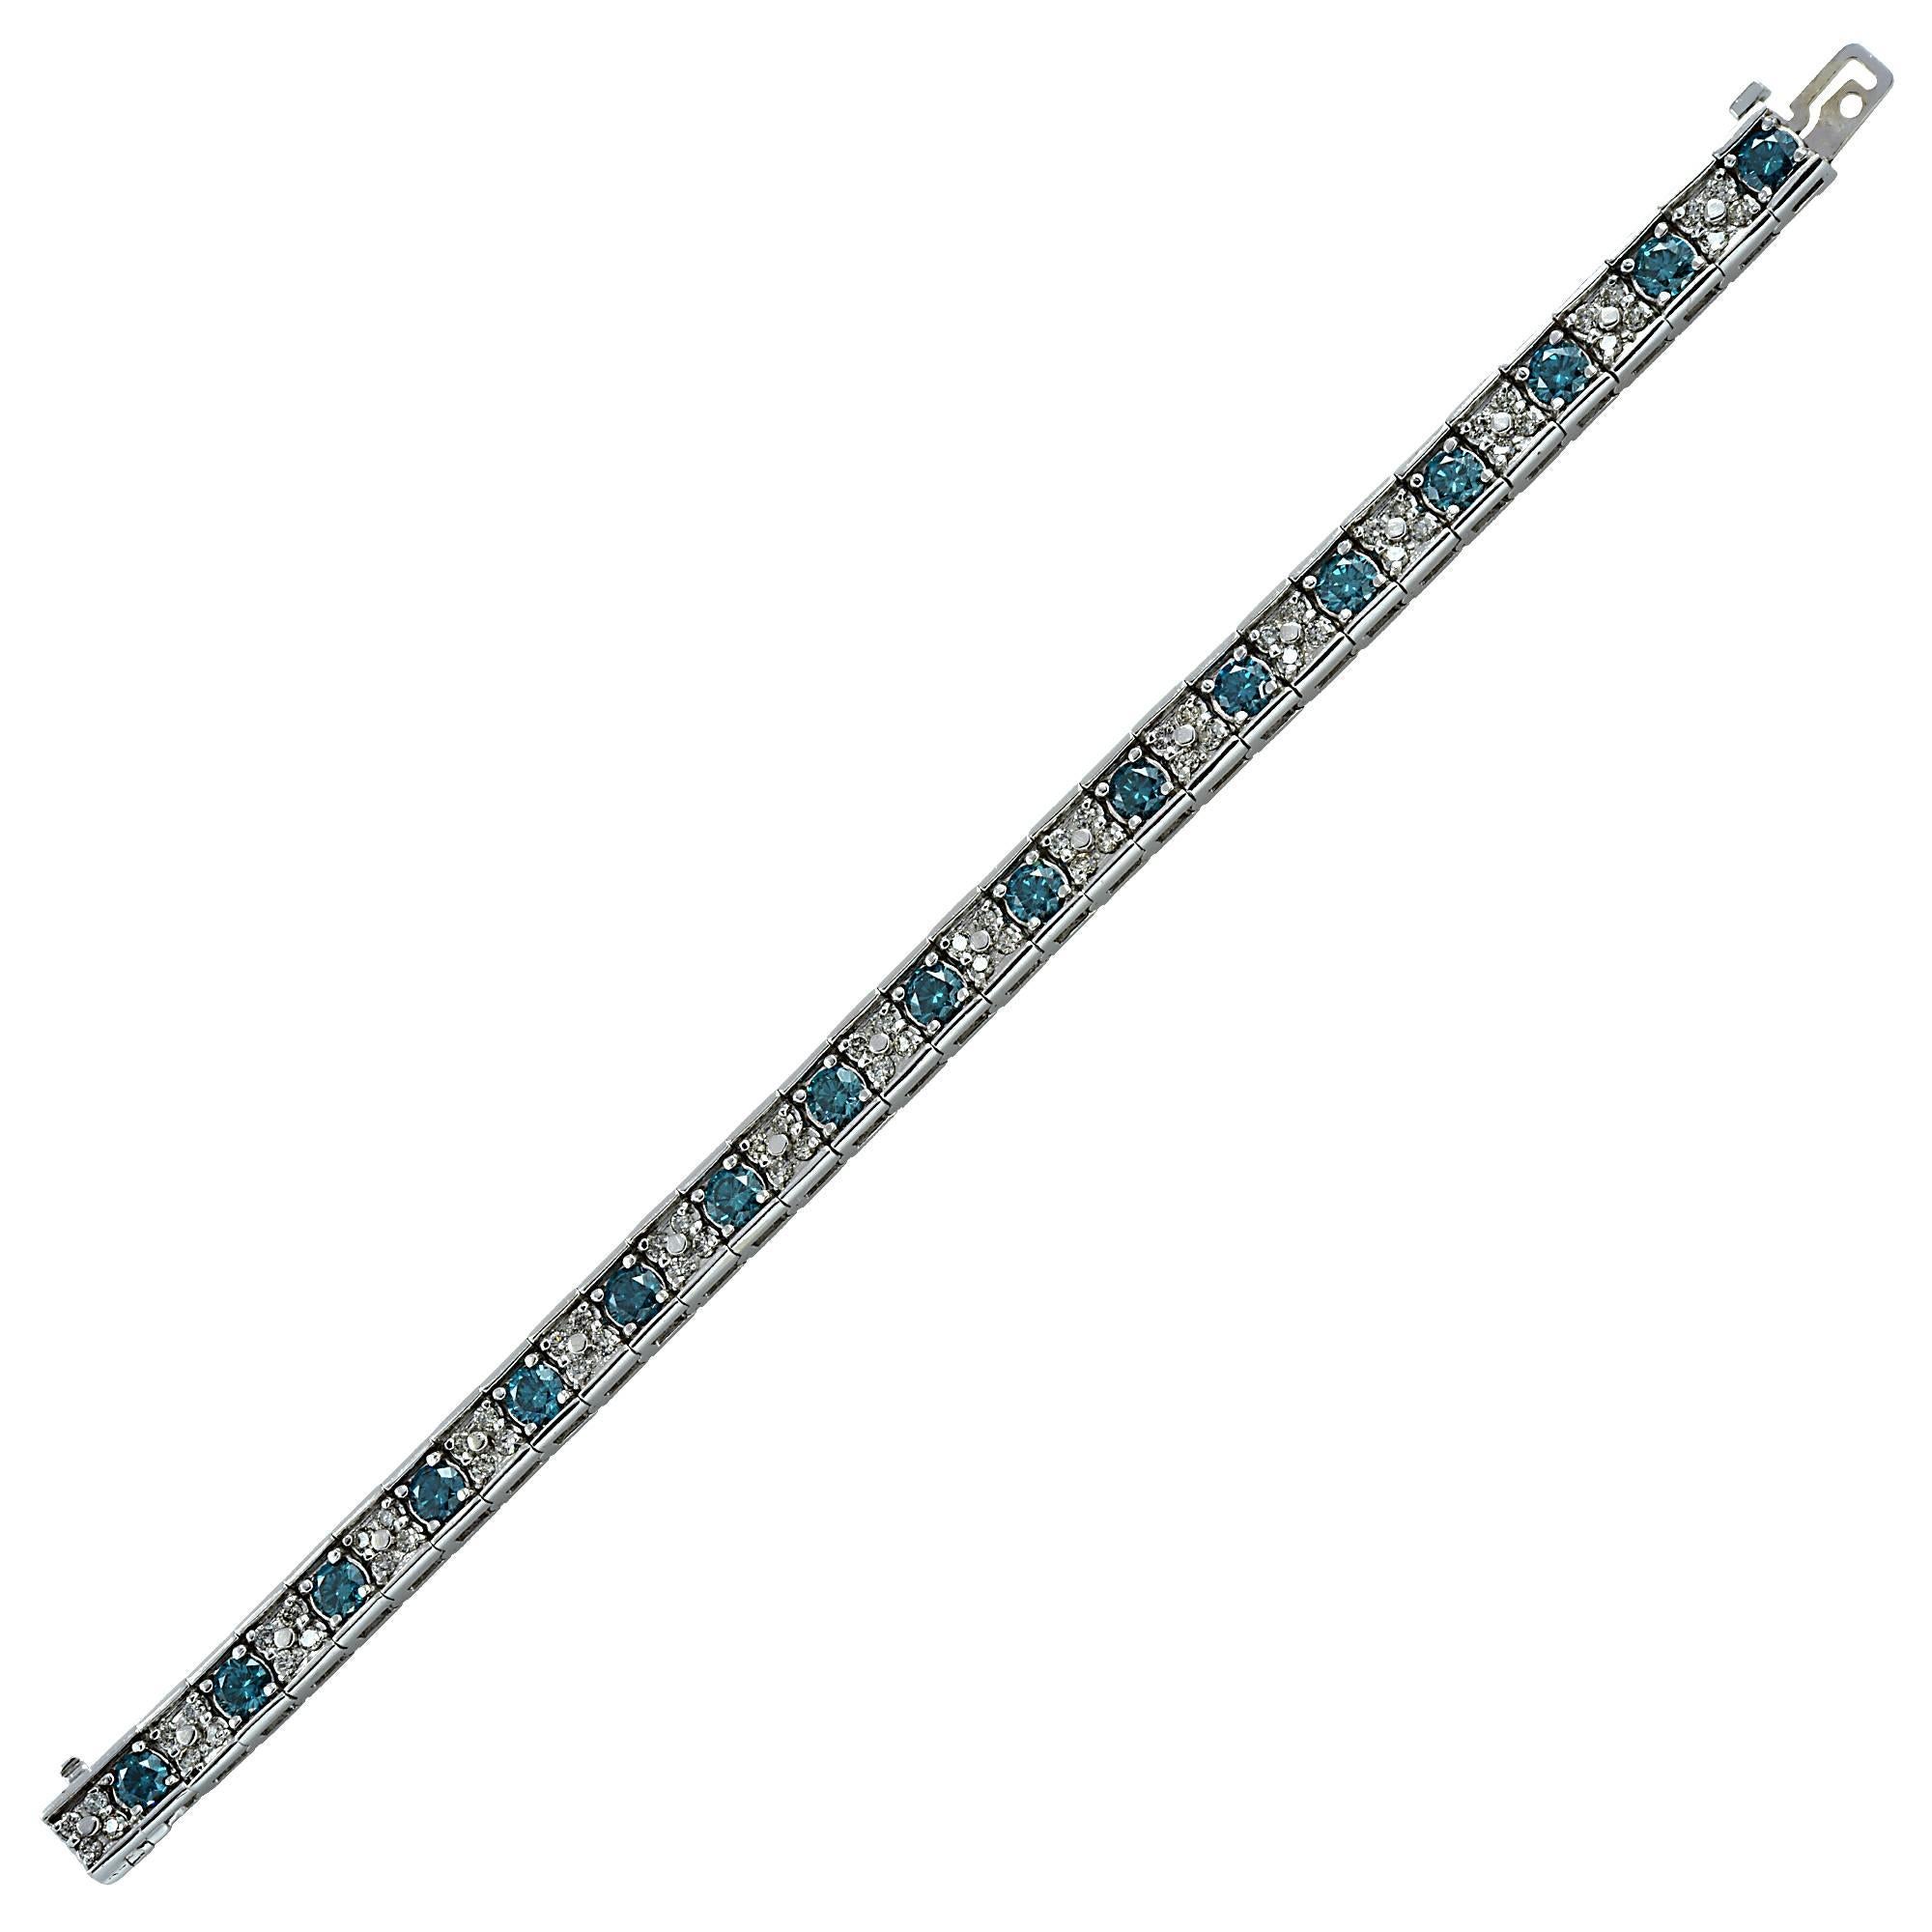 14k white gold bracelet containing 68 round brilliant cut diamonds weighing approximately 2cts H-J color and SI clarity, as well as 17 round brilliant cut irradiated blue diamonds weighing approximately 7cts.

This bracelet measures 7 inches in